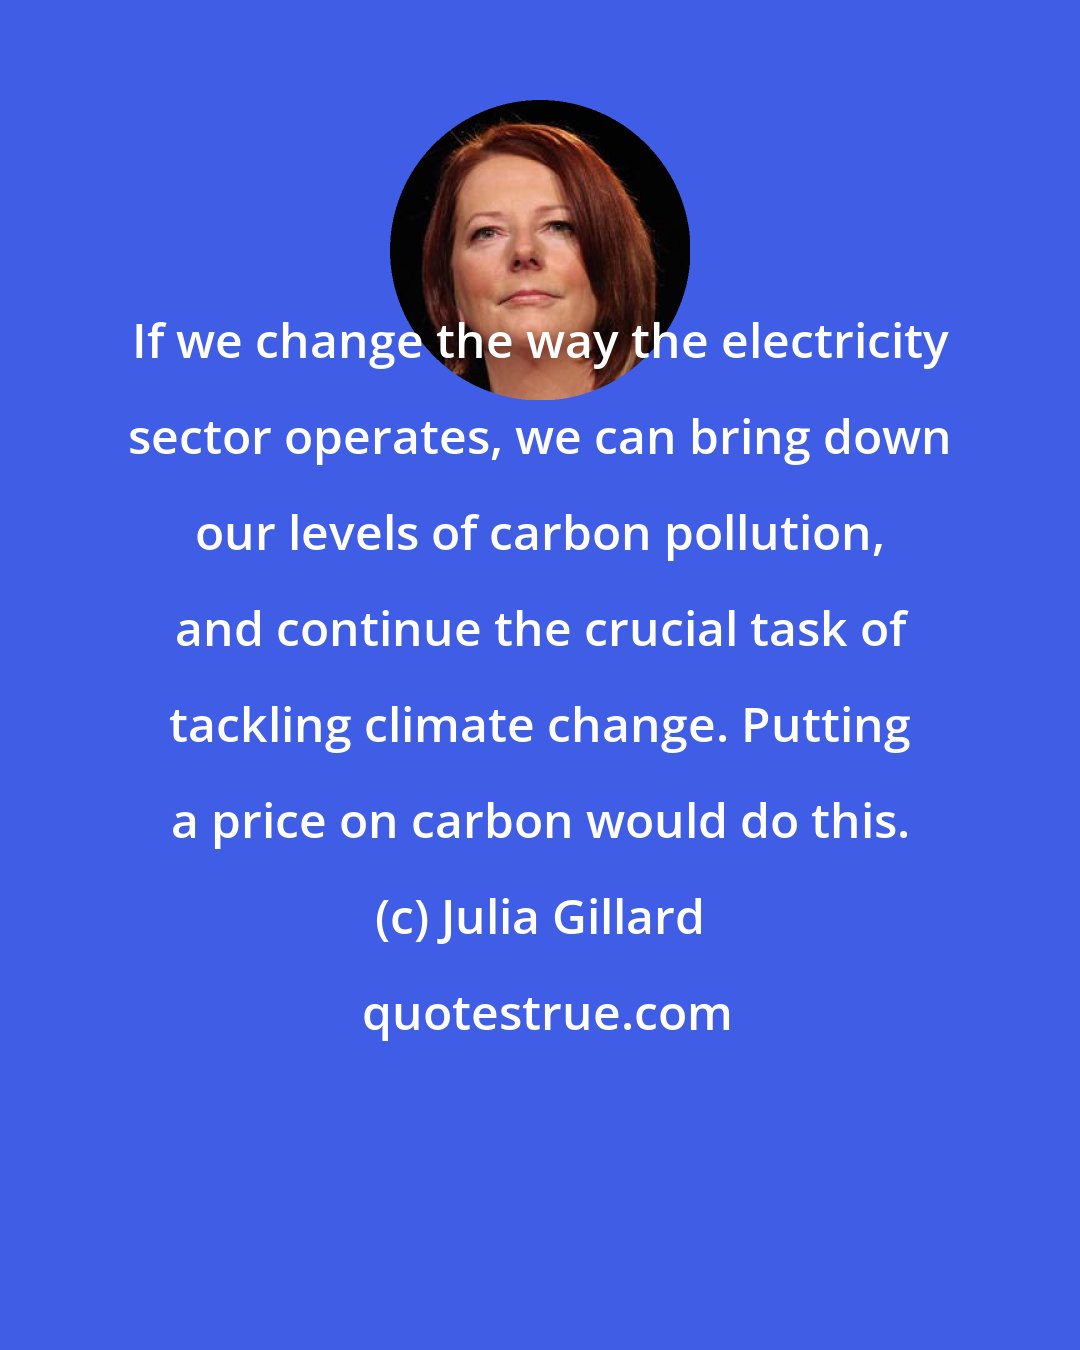 Julia Gillard: If we change the way the electricity sector operates, we can bring down our levels of carbon pollution, and continue the crucial task of tackling climate change. Putting a price on carbon would do this.